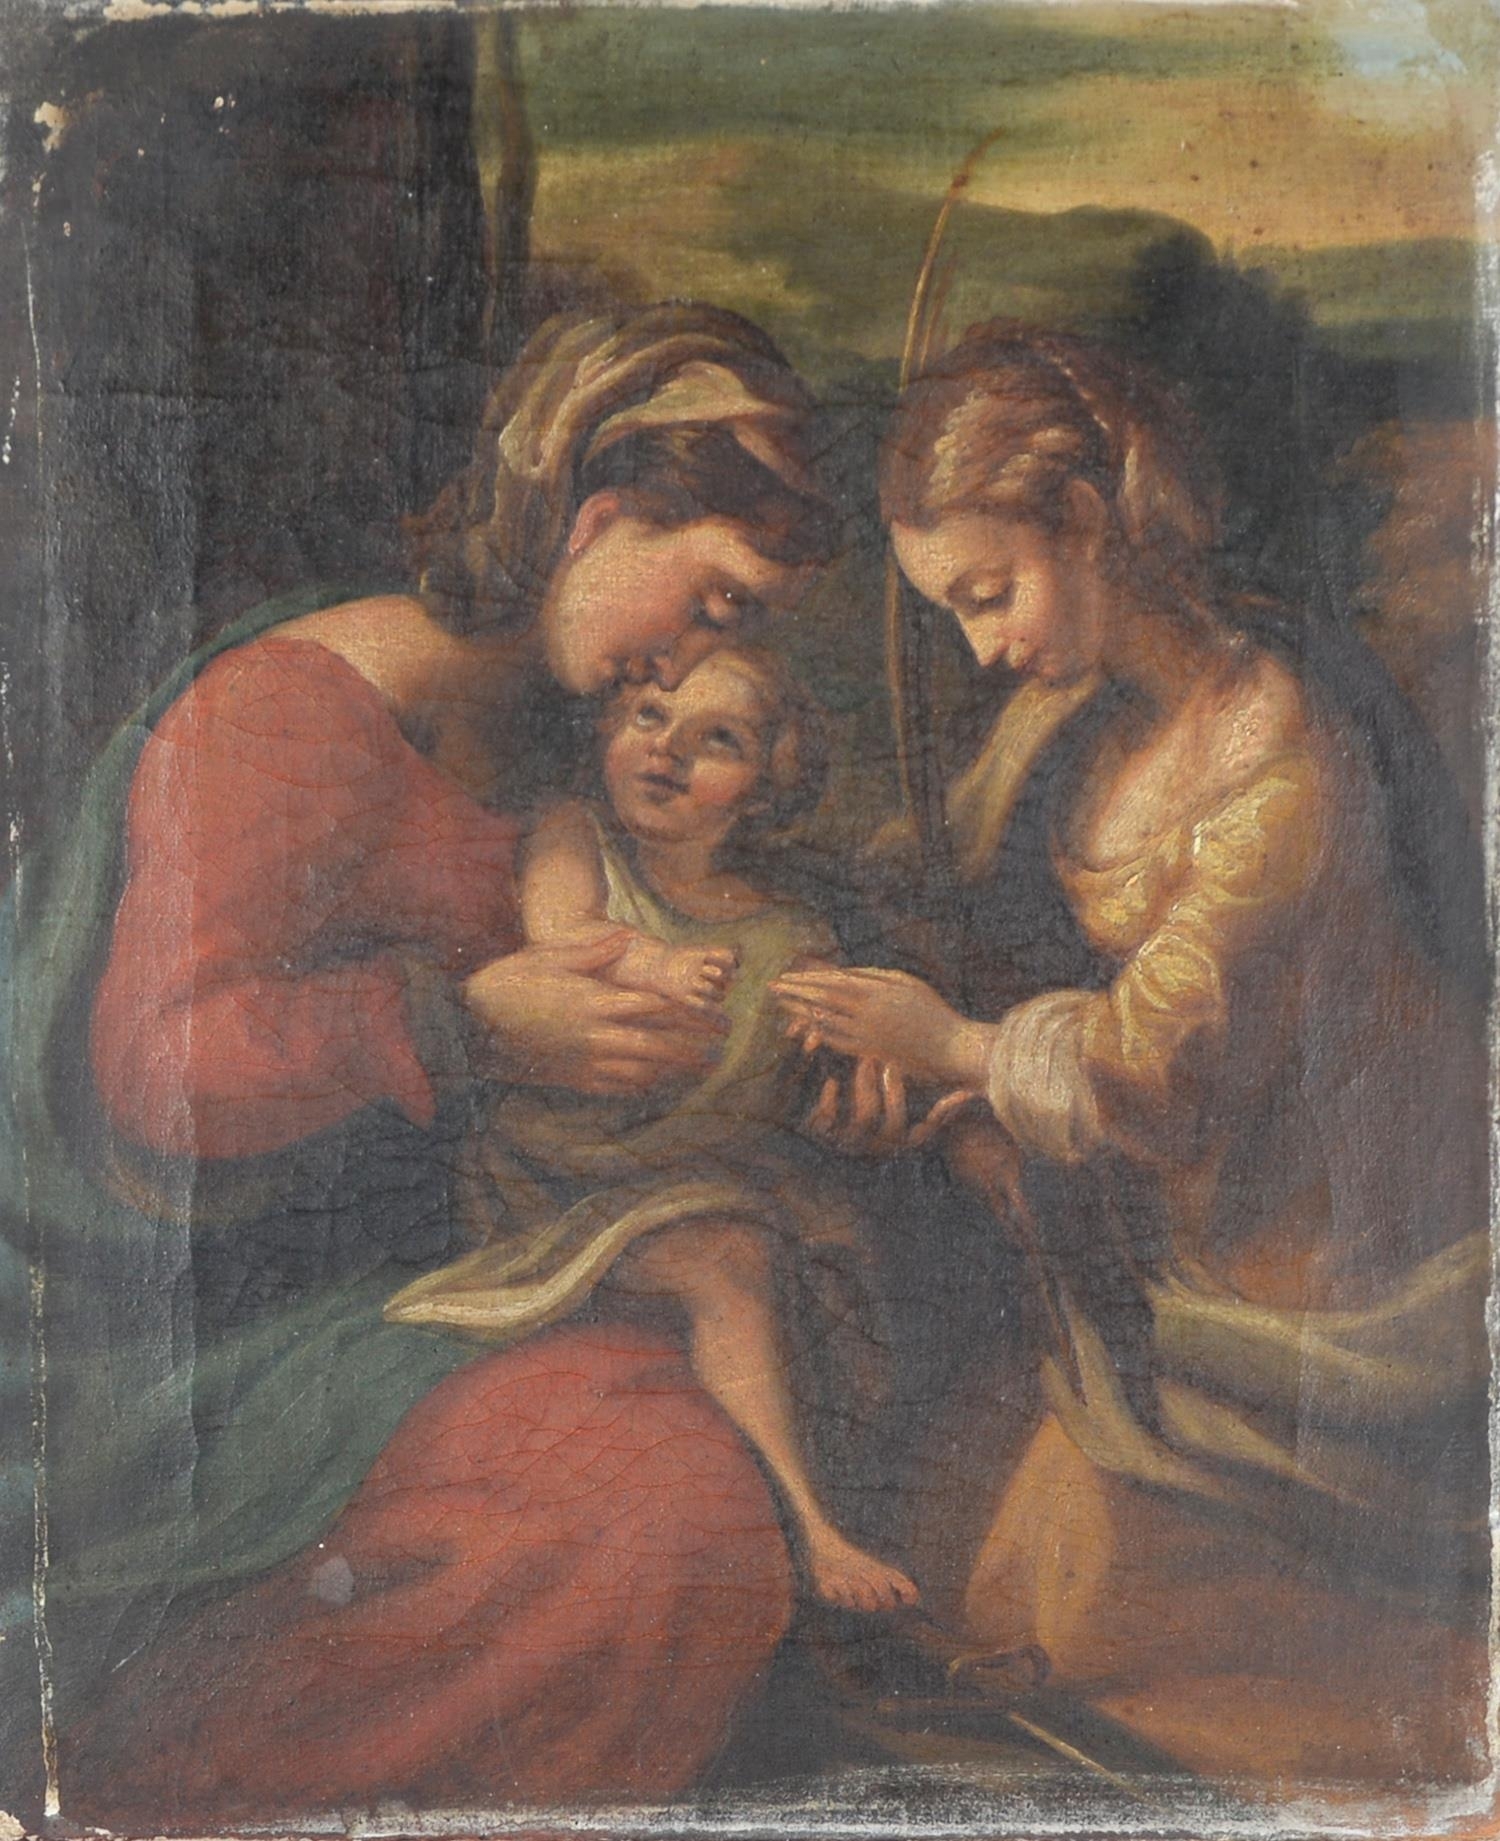 The Virgin and Child with St Anne, by Correggio